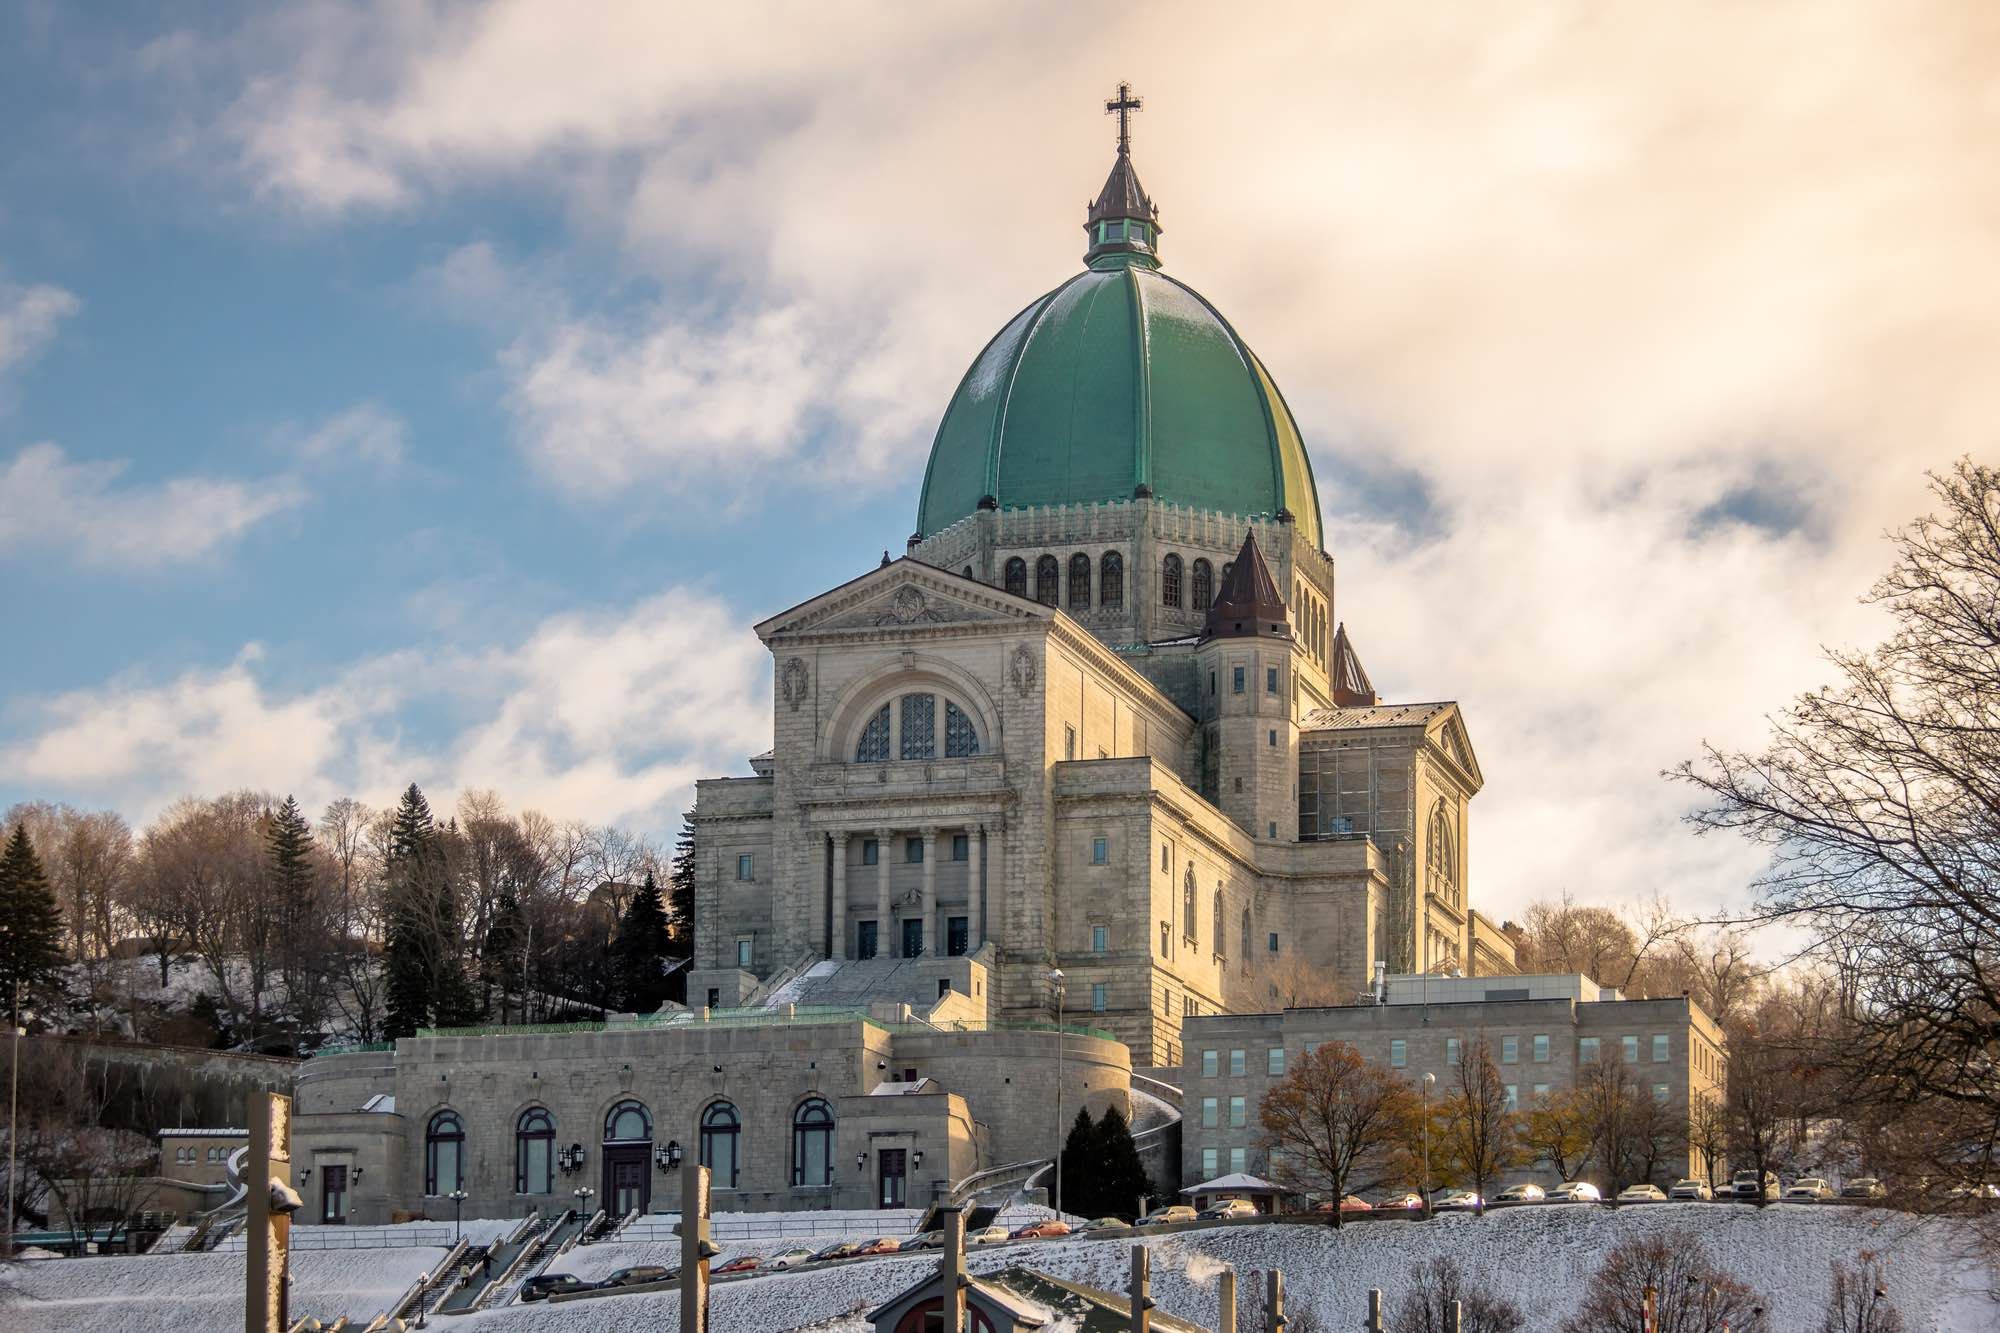 St Joseph's Oratory now included in class action